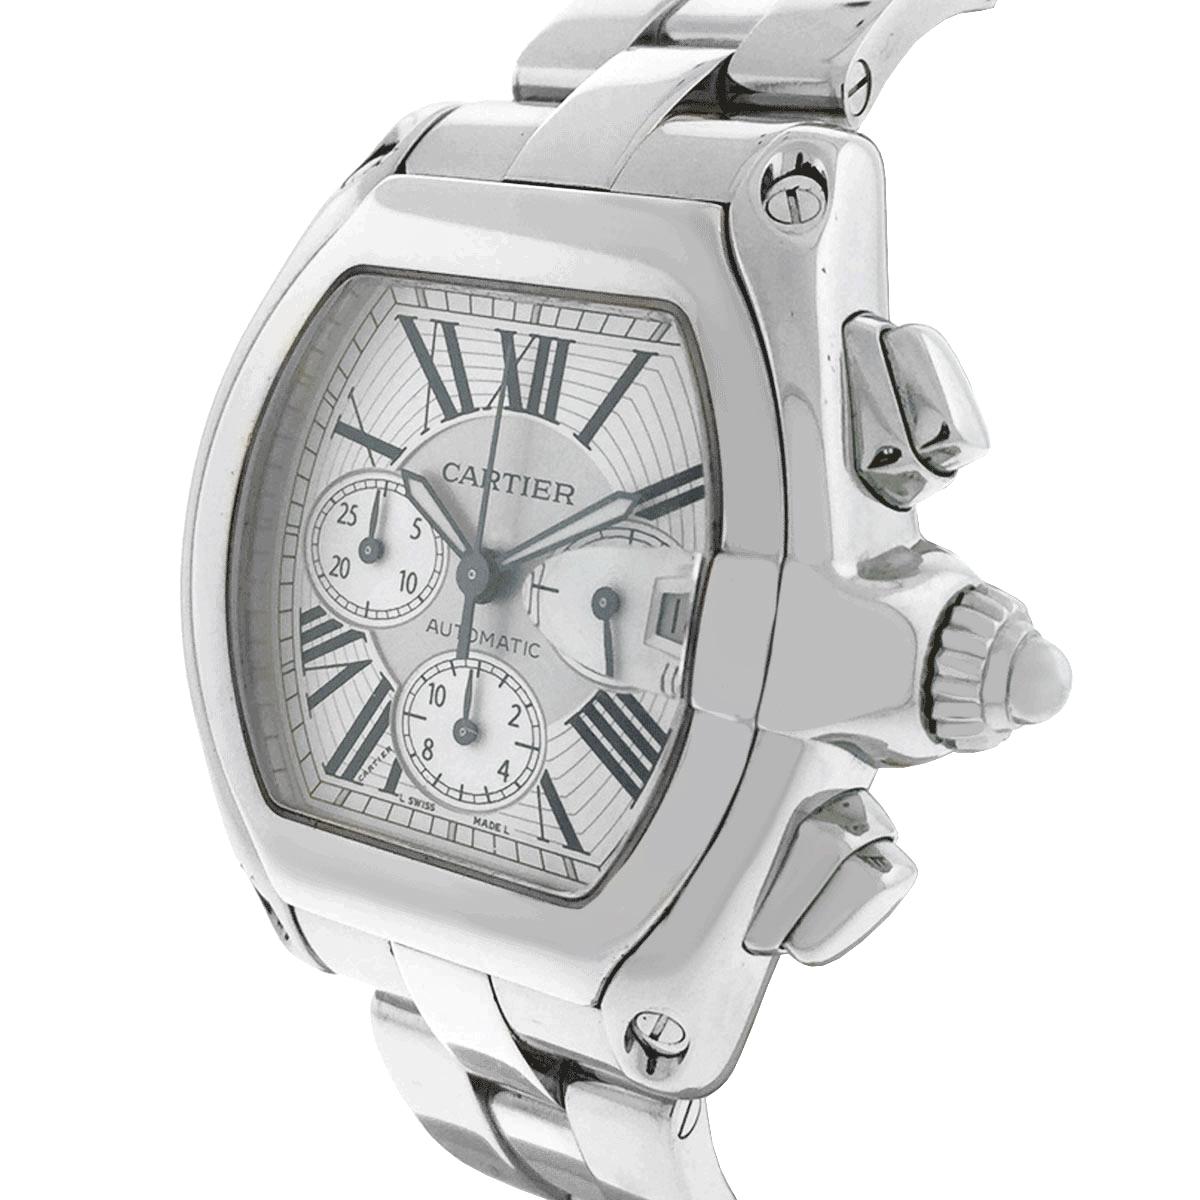 Cartier 2618 Roadster Stainless Steel Silver Chronograph Dial Watch
The Cartier 2618 Roadster Stainless Steel Silver Chronograph Dial Watch is a symbol of luxury and precision in the world of timepieces. This watch, with its stainless steel